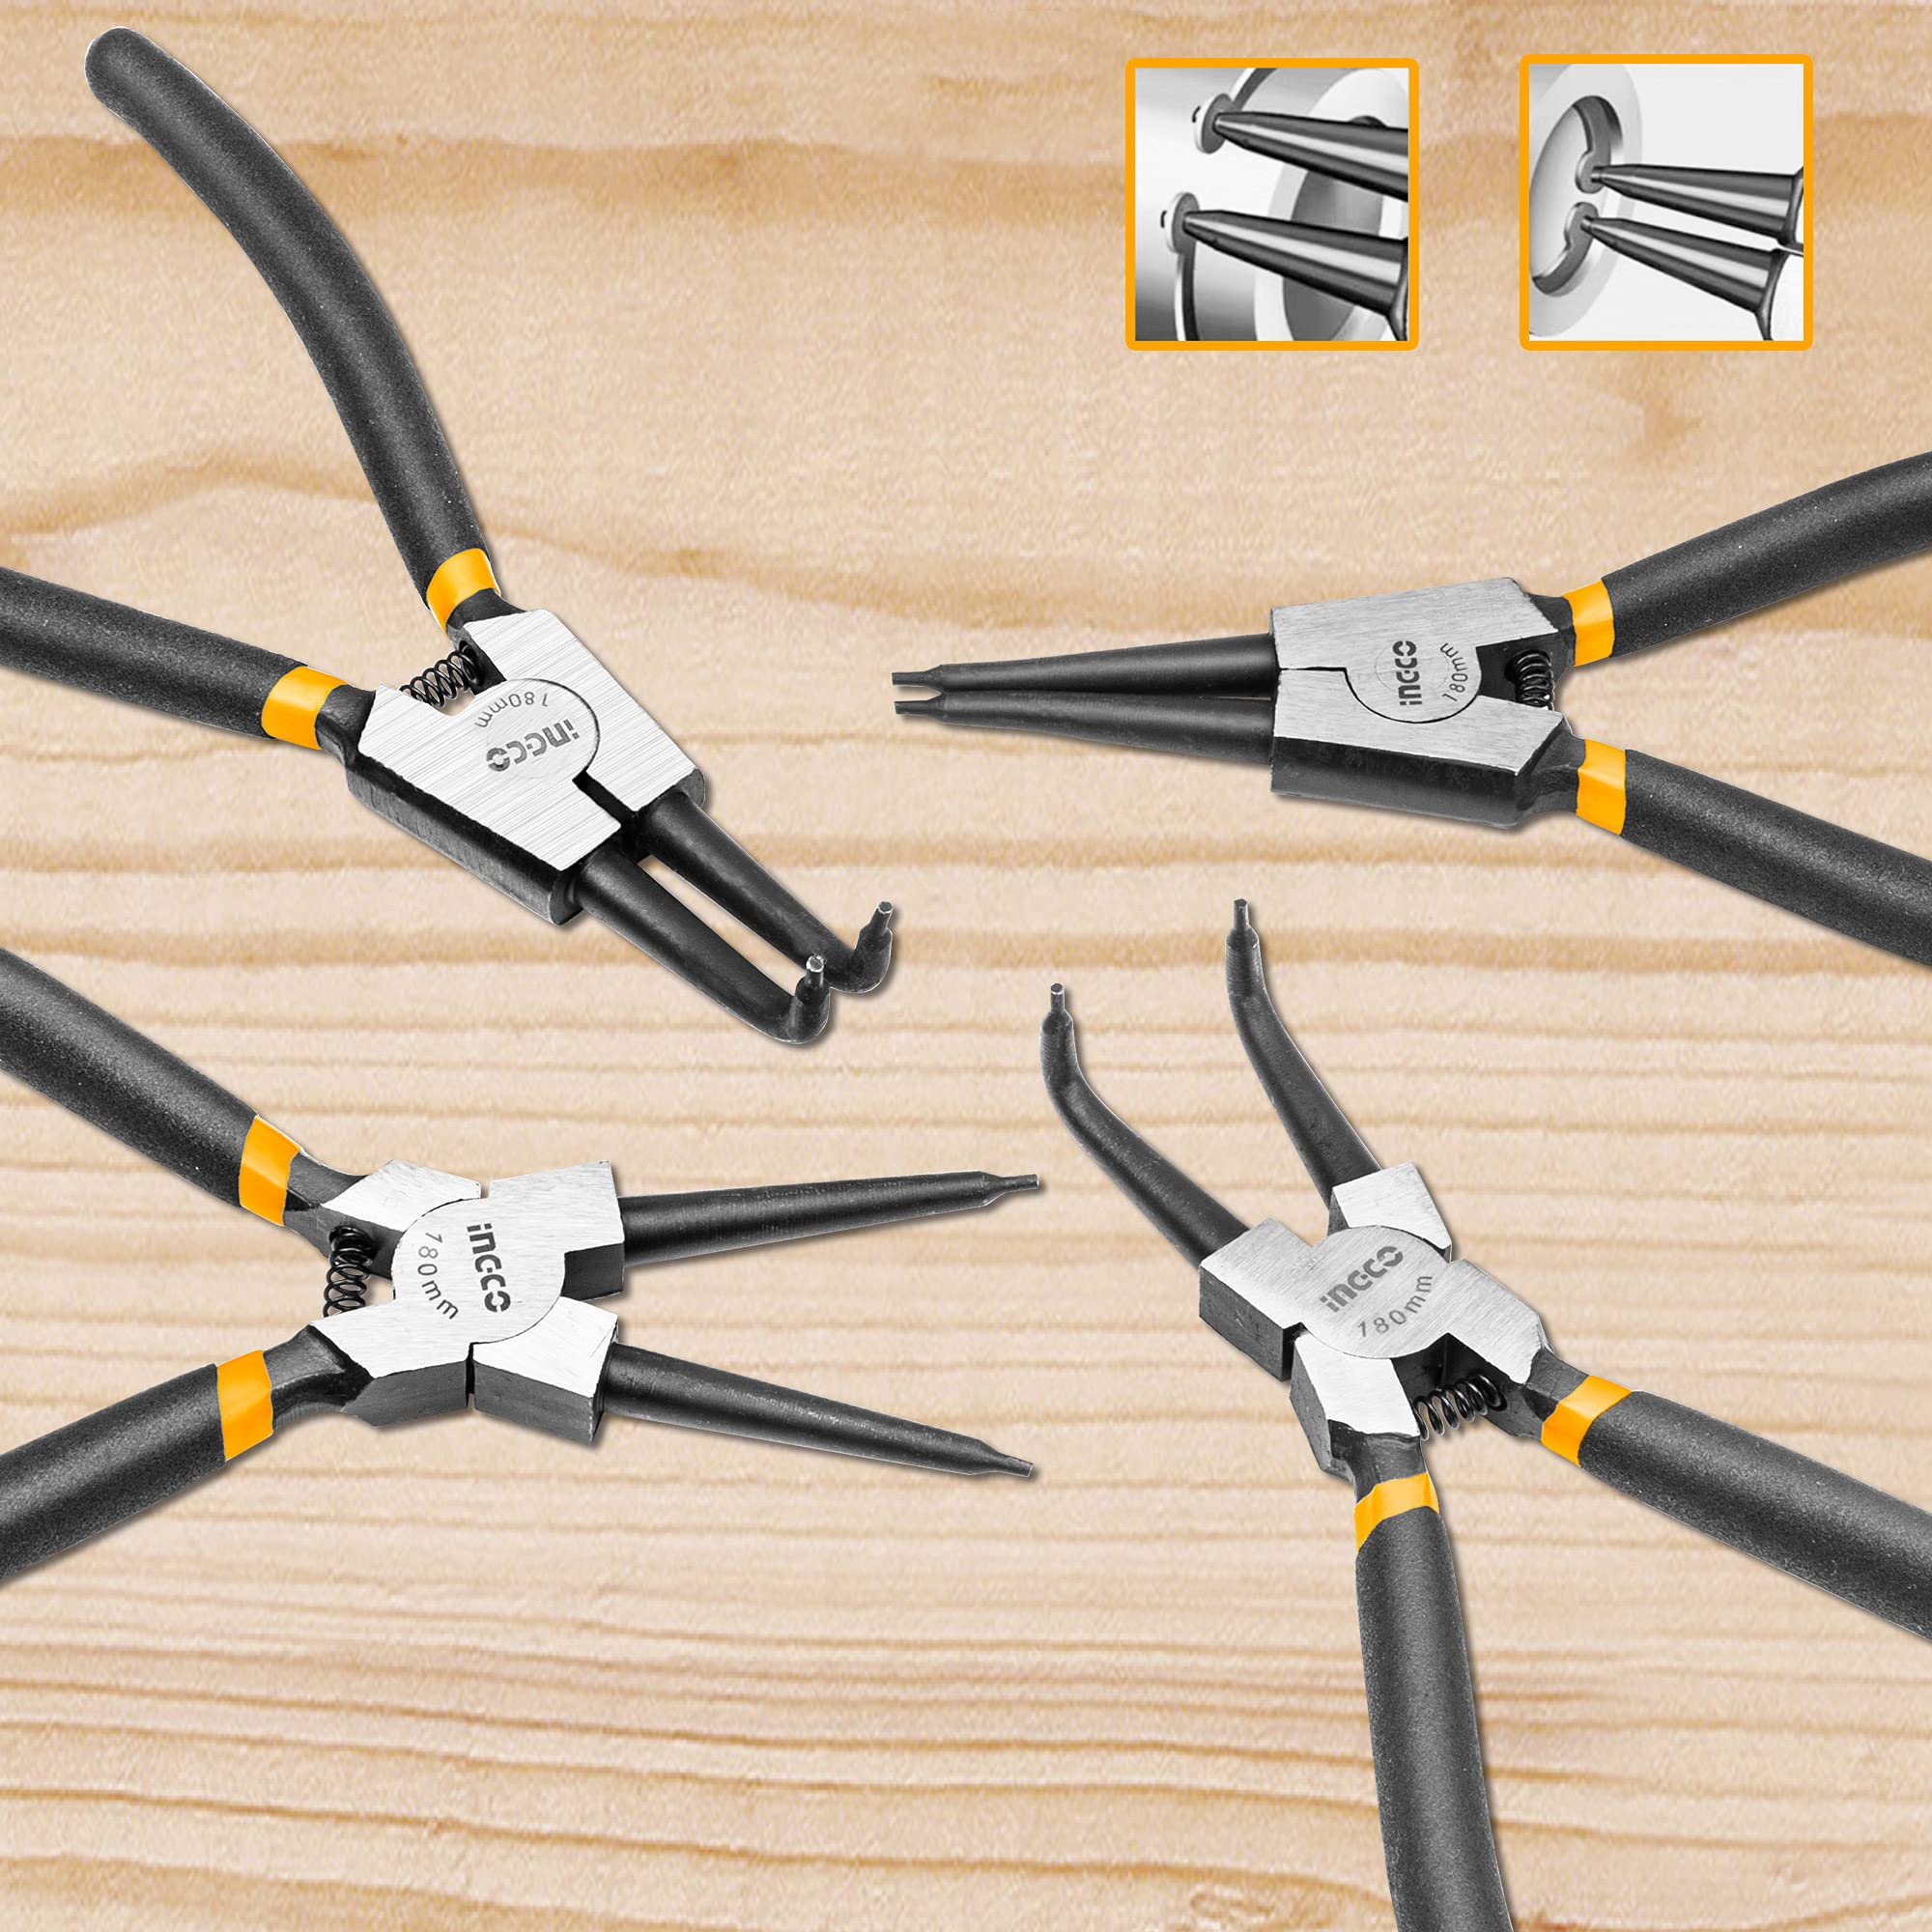 INGCO Snap Ring Plier Set 7 "/ 180mm - HCCPS01180 | Supply Master | Accra, Ghana Pliers Buy Tools hardware Building materials